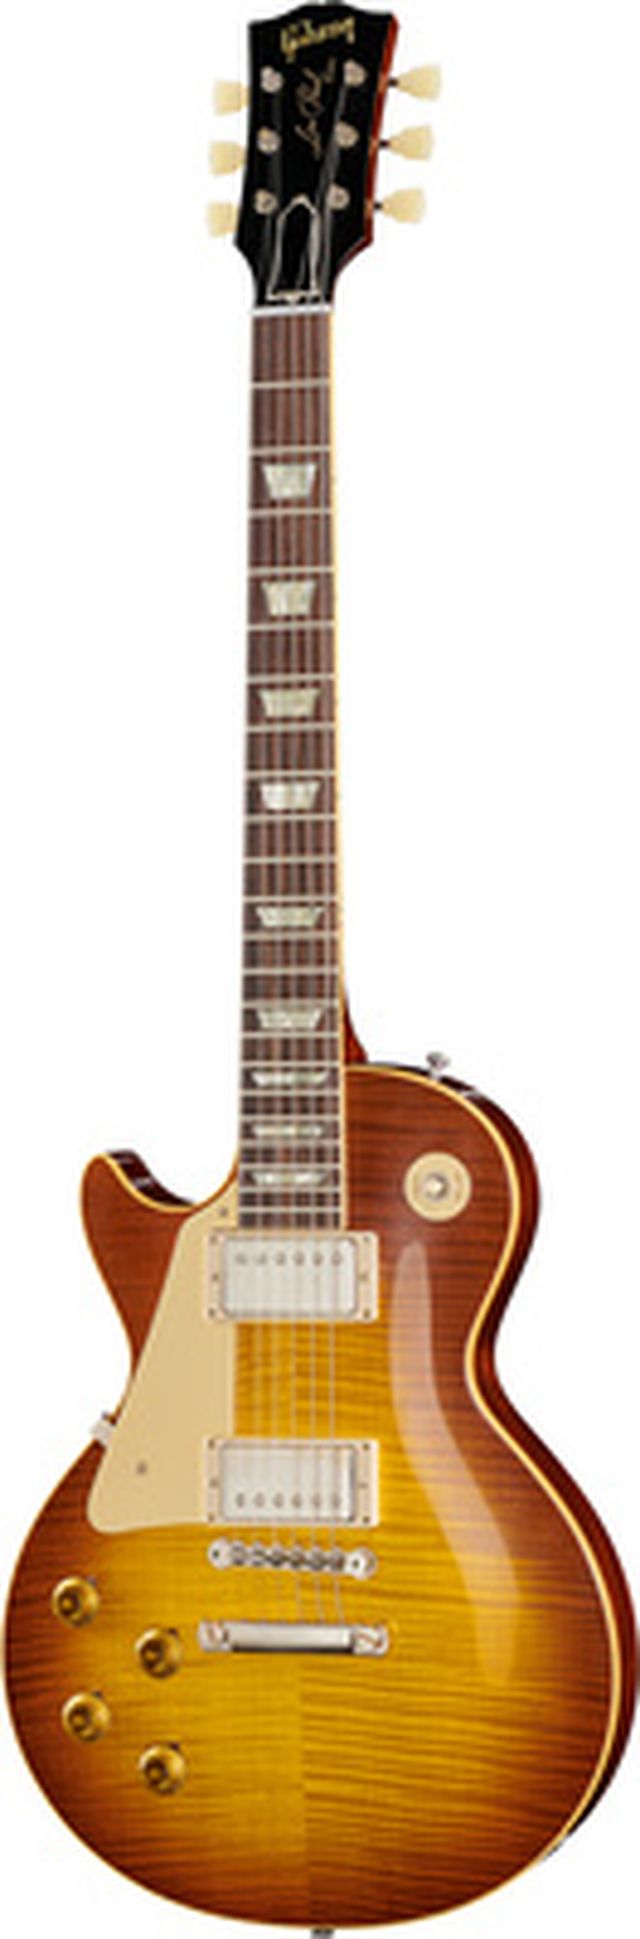 Gibson Les Paul 59 ITB Lefthand VOS